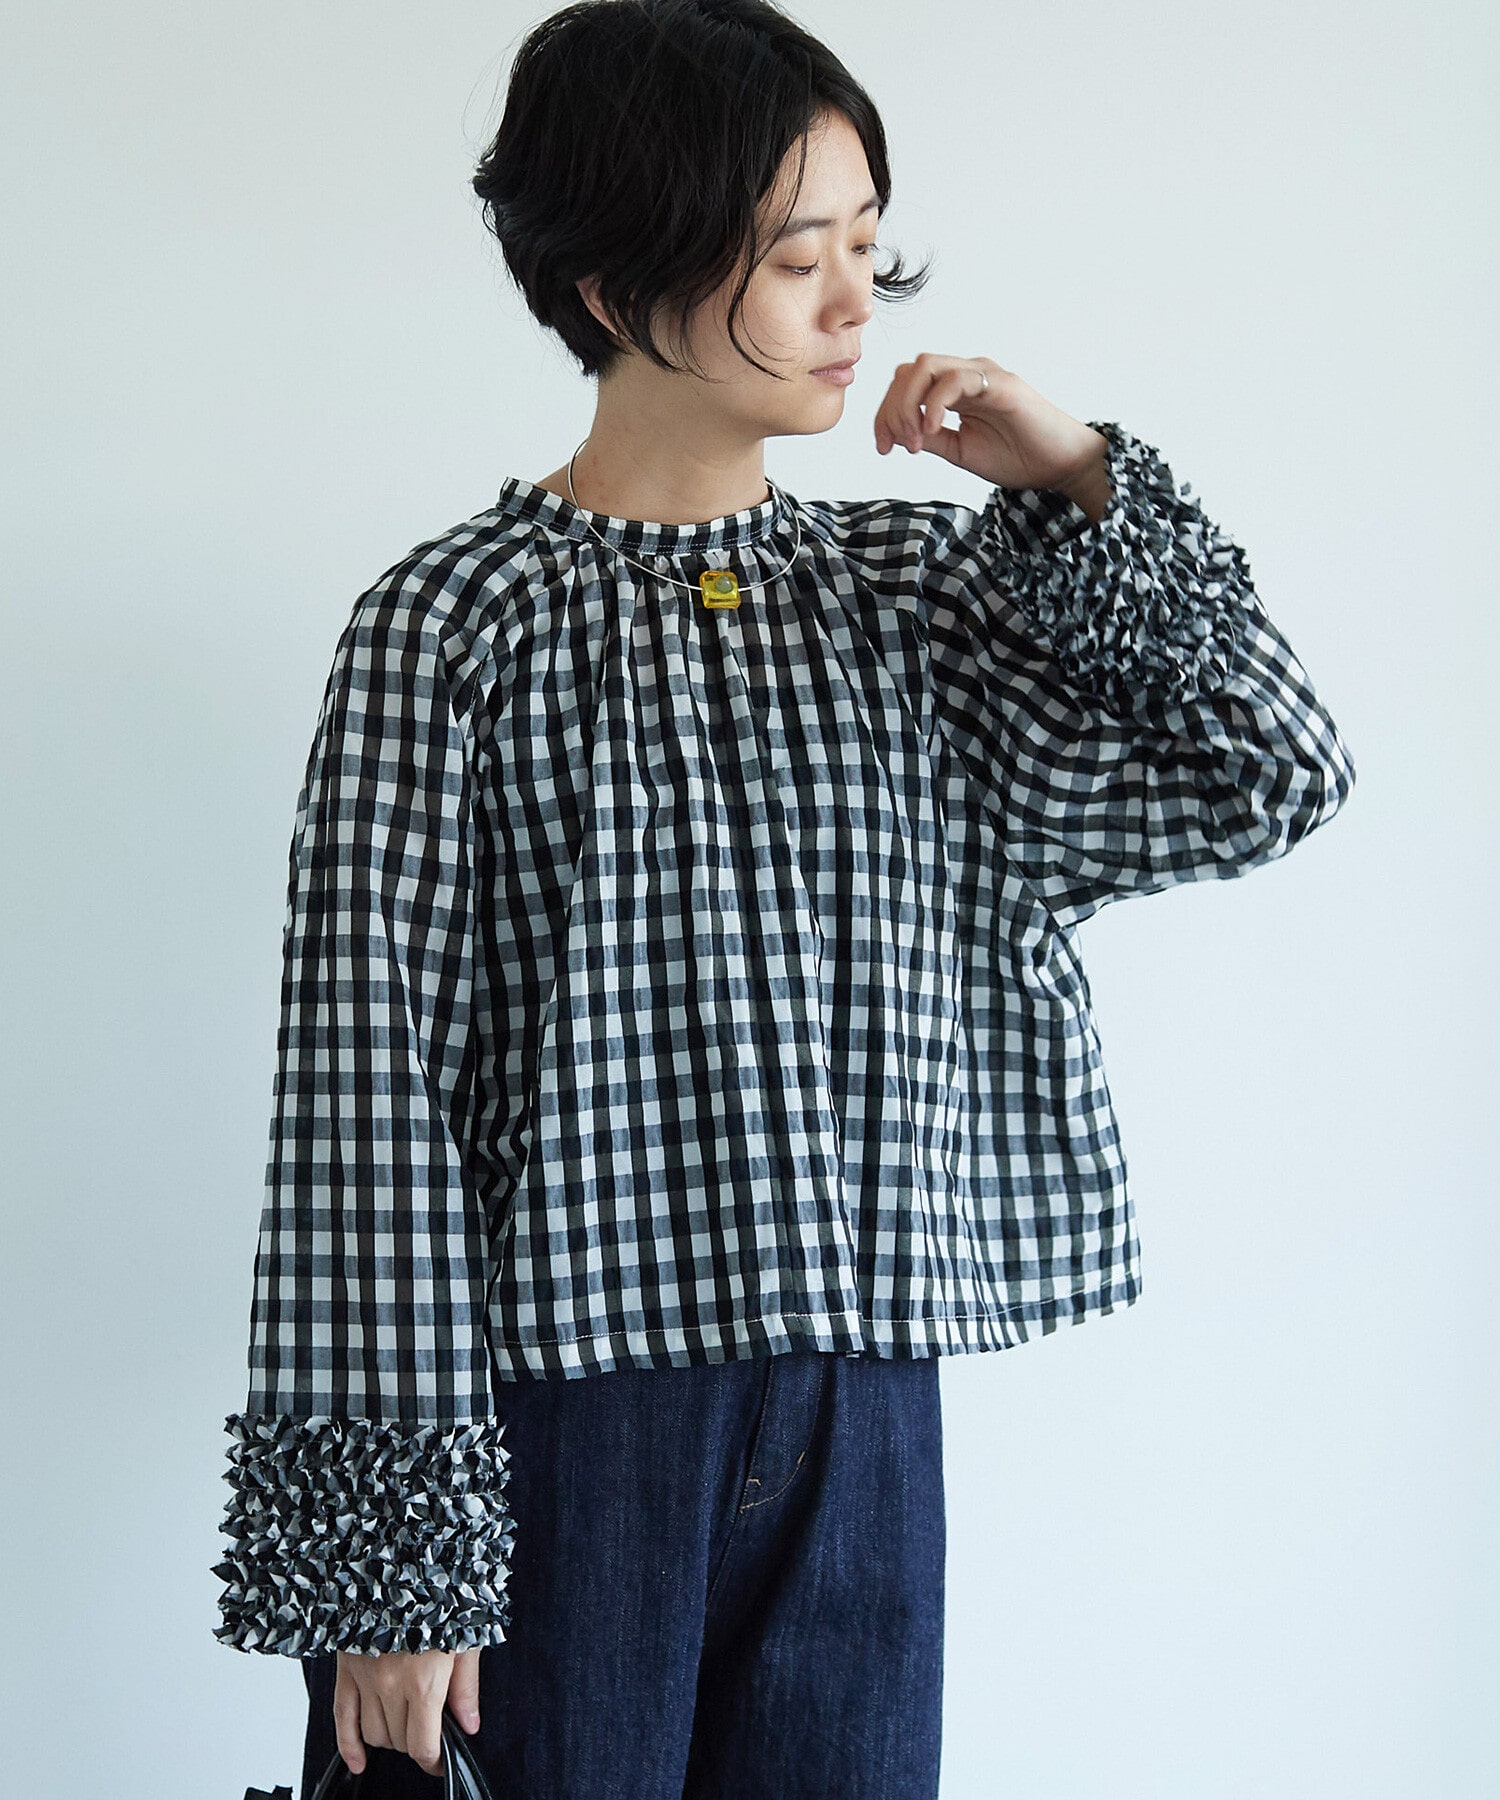 AMBIDEX Store Polyester Cotton gingham check frilled sleeves 